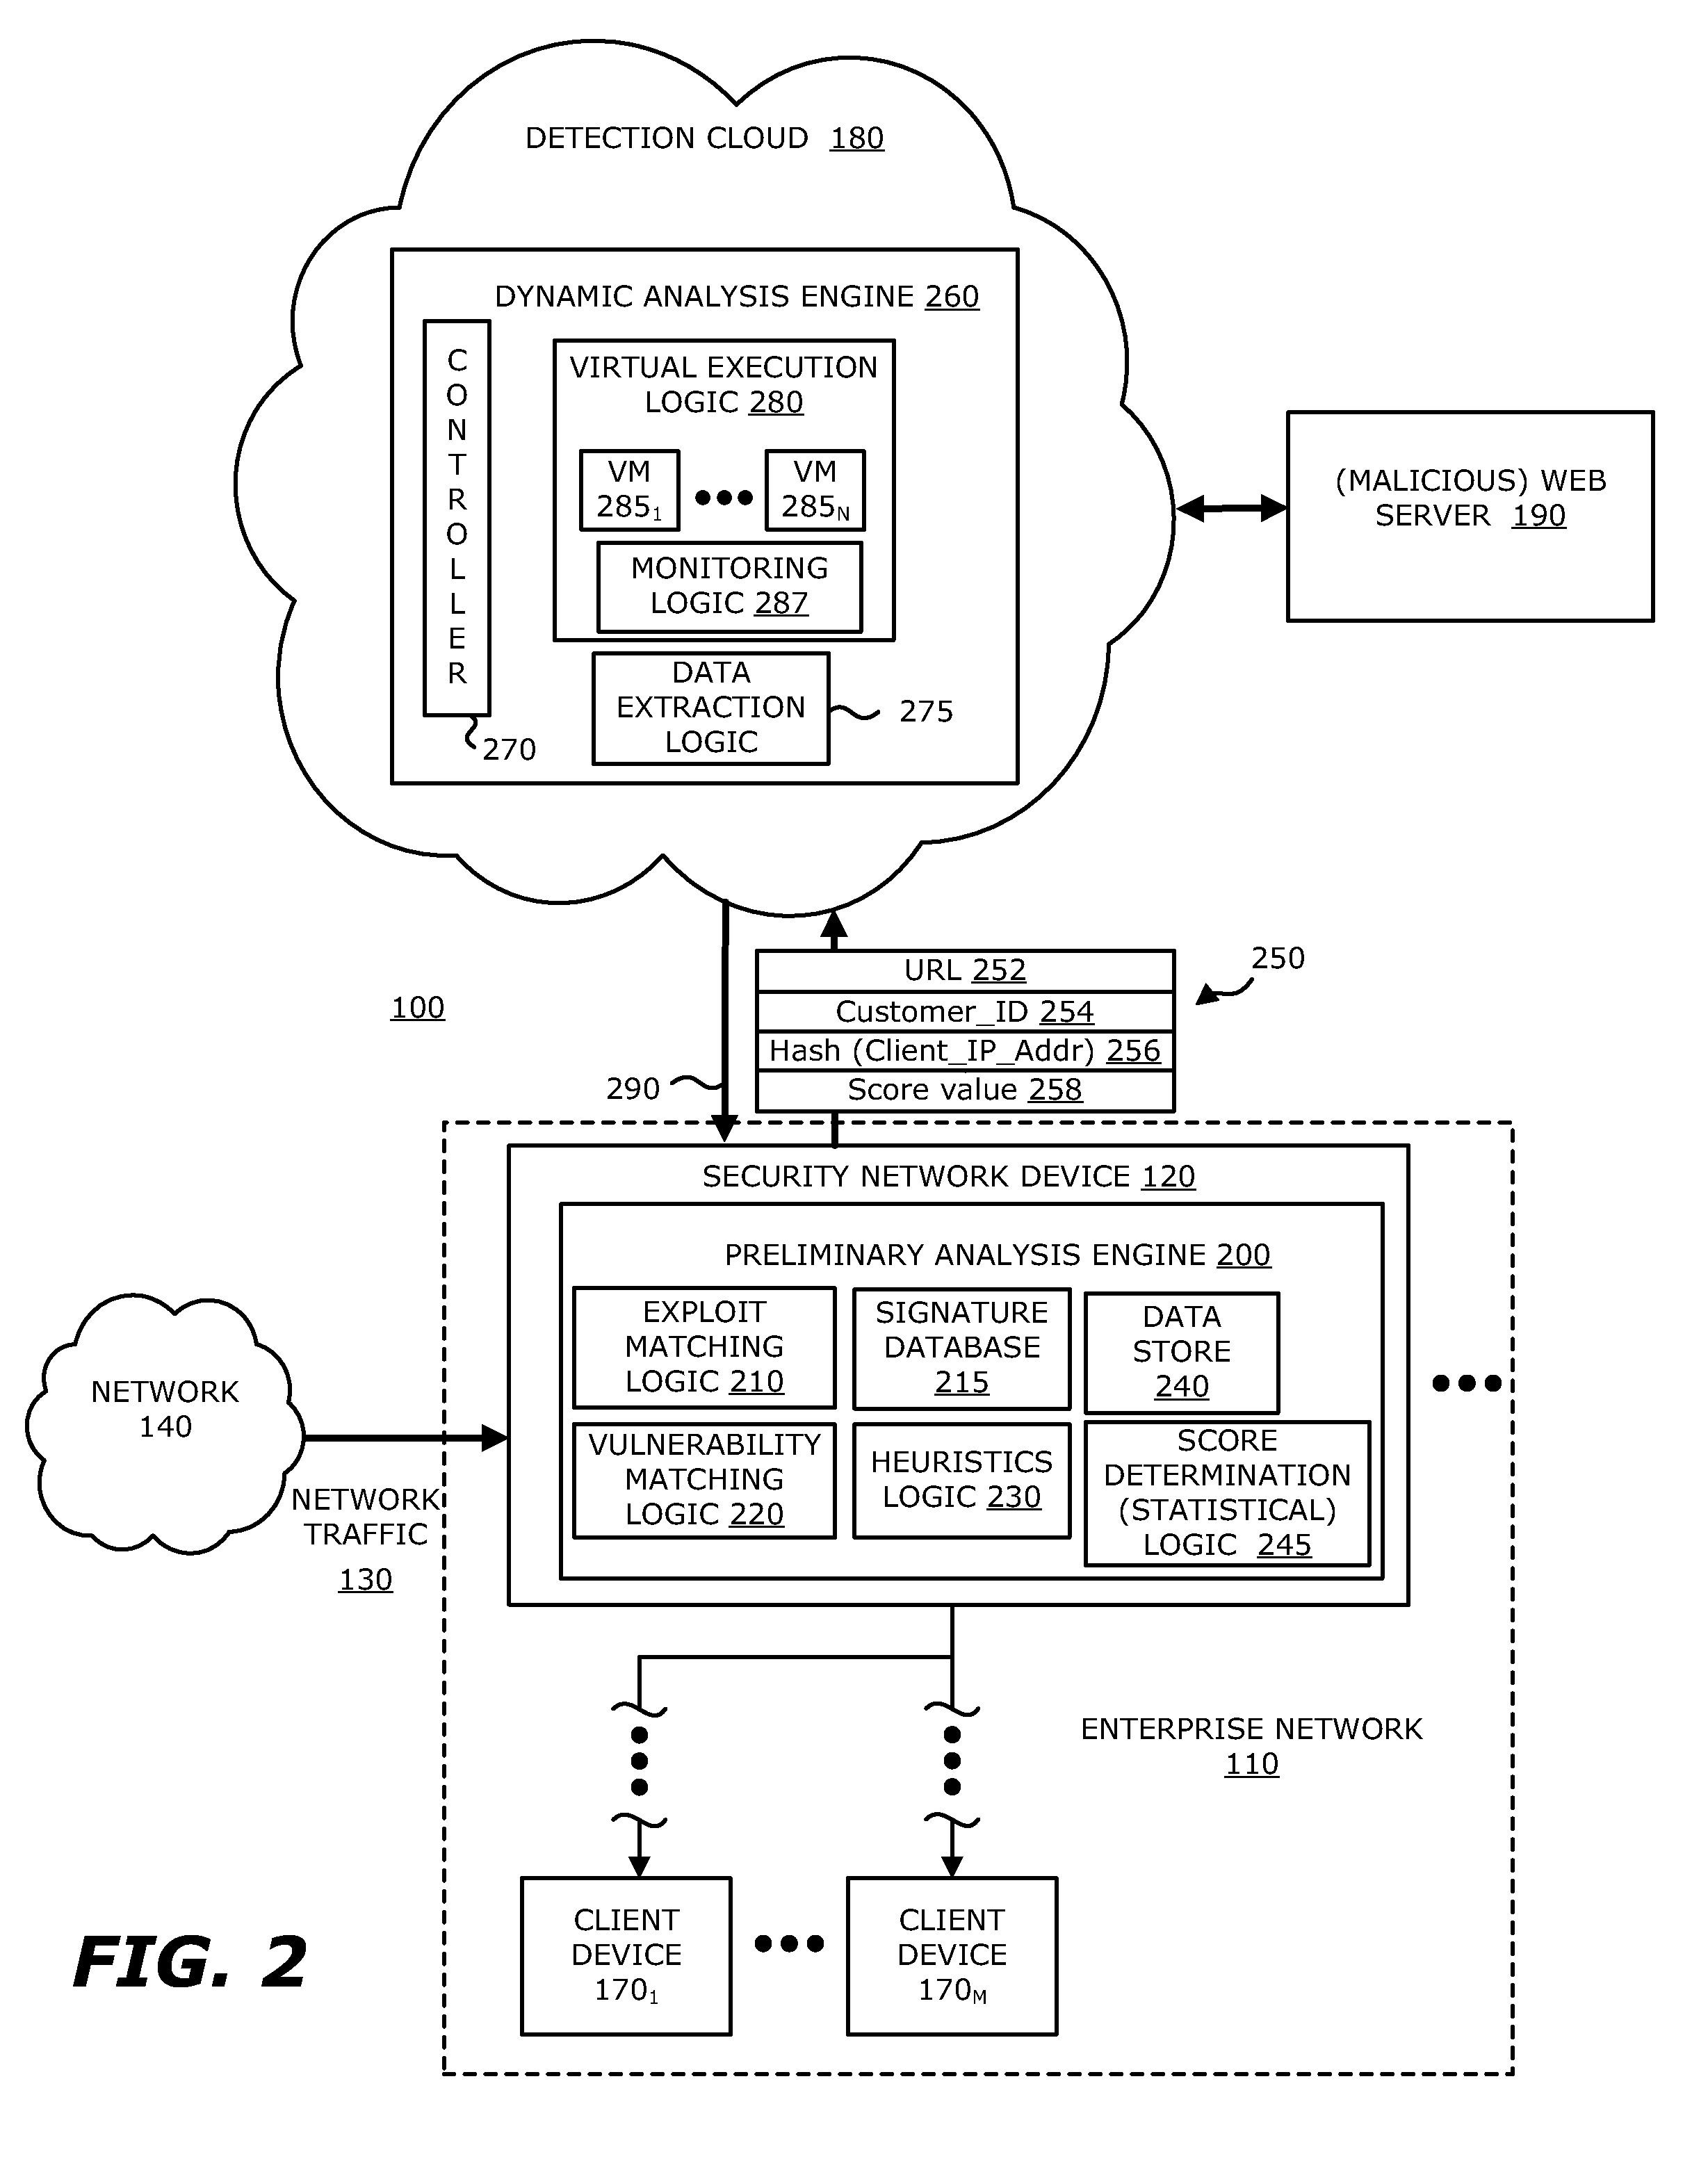 System, device and method for detecting a malicious attack based on communcations between remotely hosted virtual machines and malicious web servers